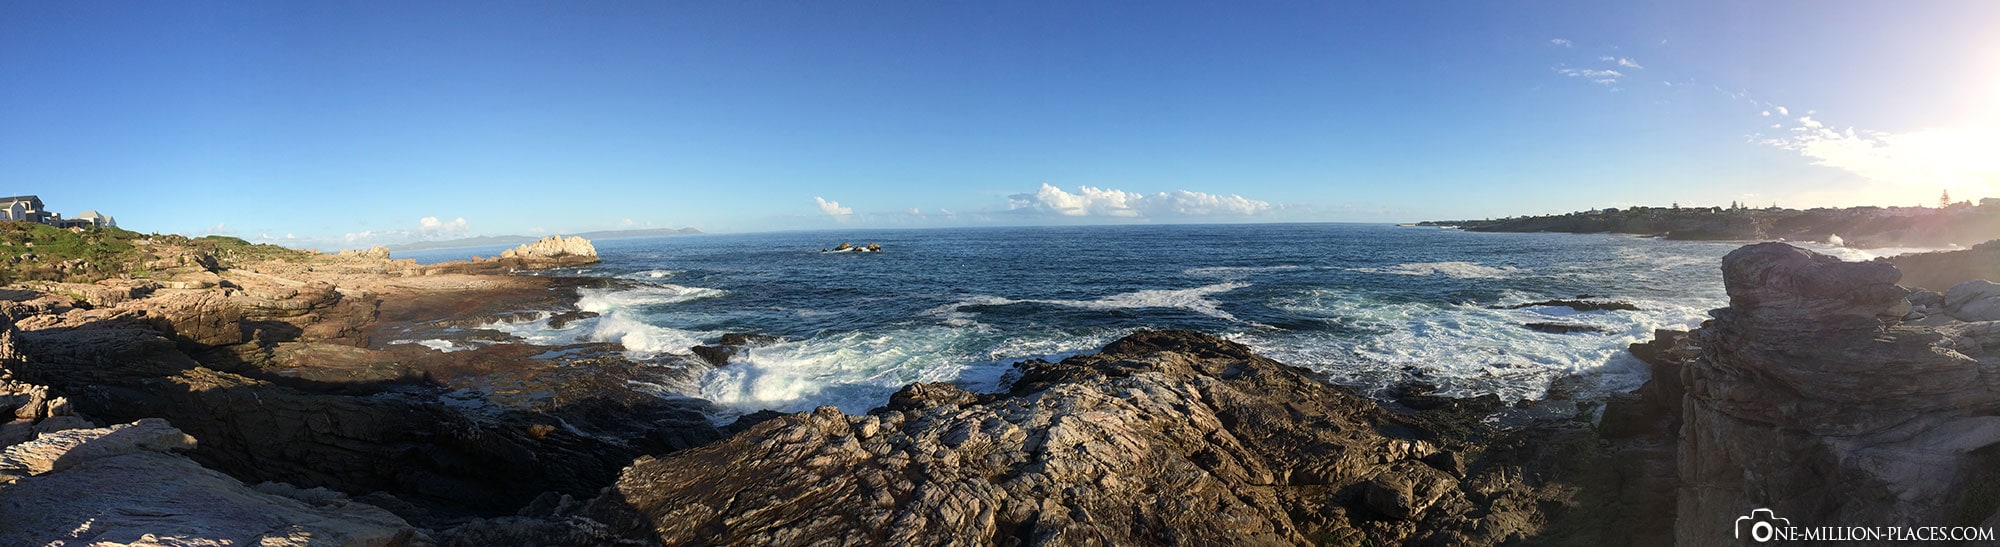 Panorama, Hermanus, South Africa, Africa, Round Trip, On Your Own, Travelreport